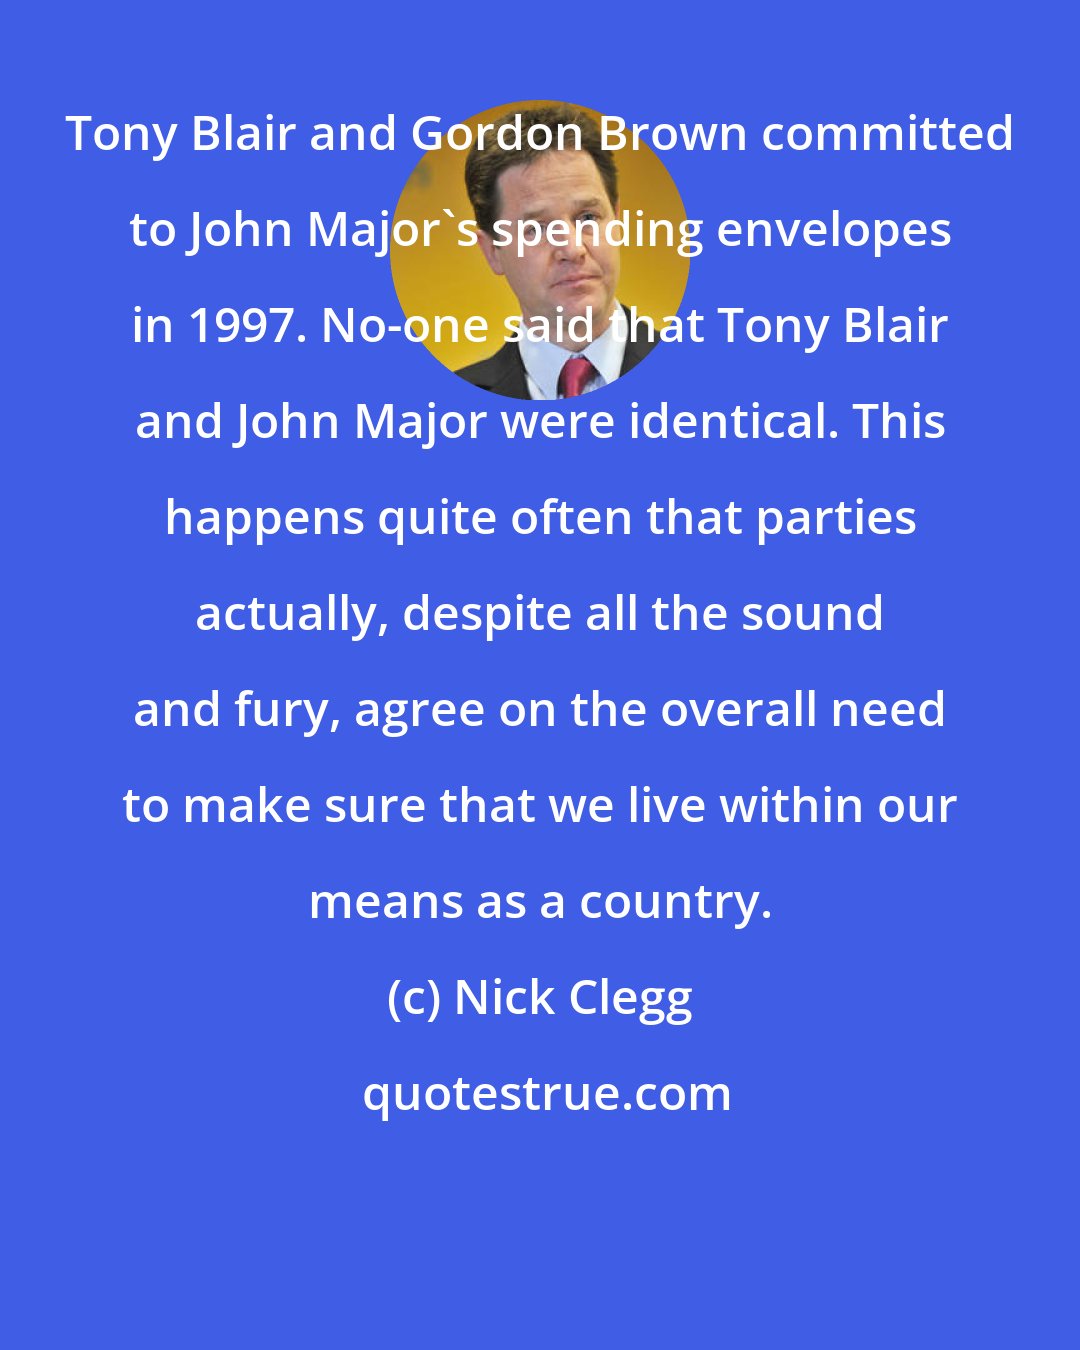 Nick Clegg: Tony Blair and Gordon Brown committed to John Major's spending envelopes in 1997. No-one said that Tony Blair and John Major were identical. This happens quite often that parties actually, despite all the sound and fury, agree on the overall need to make sure that we live within our means as a country.